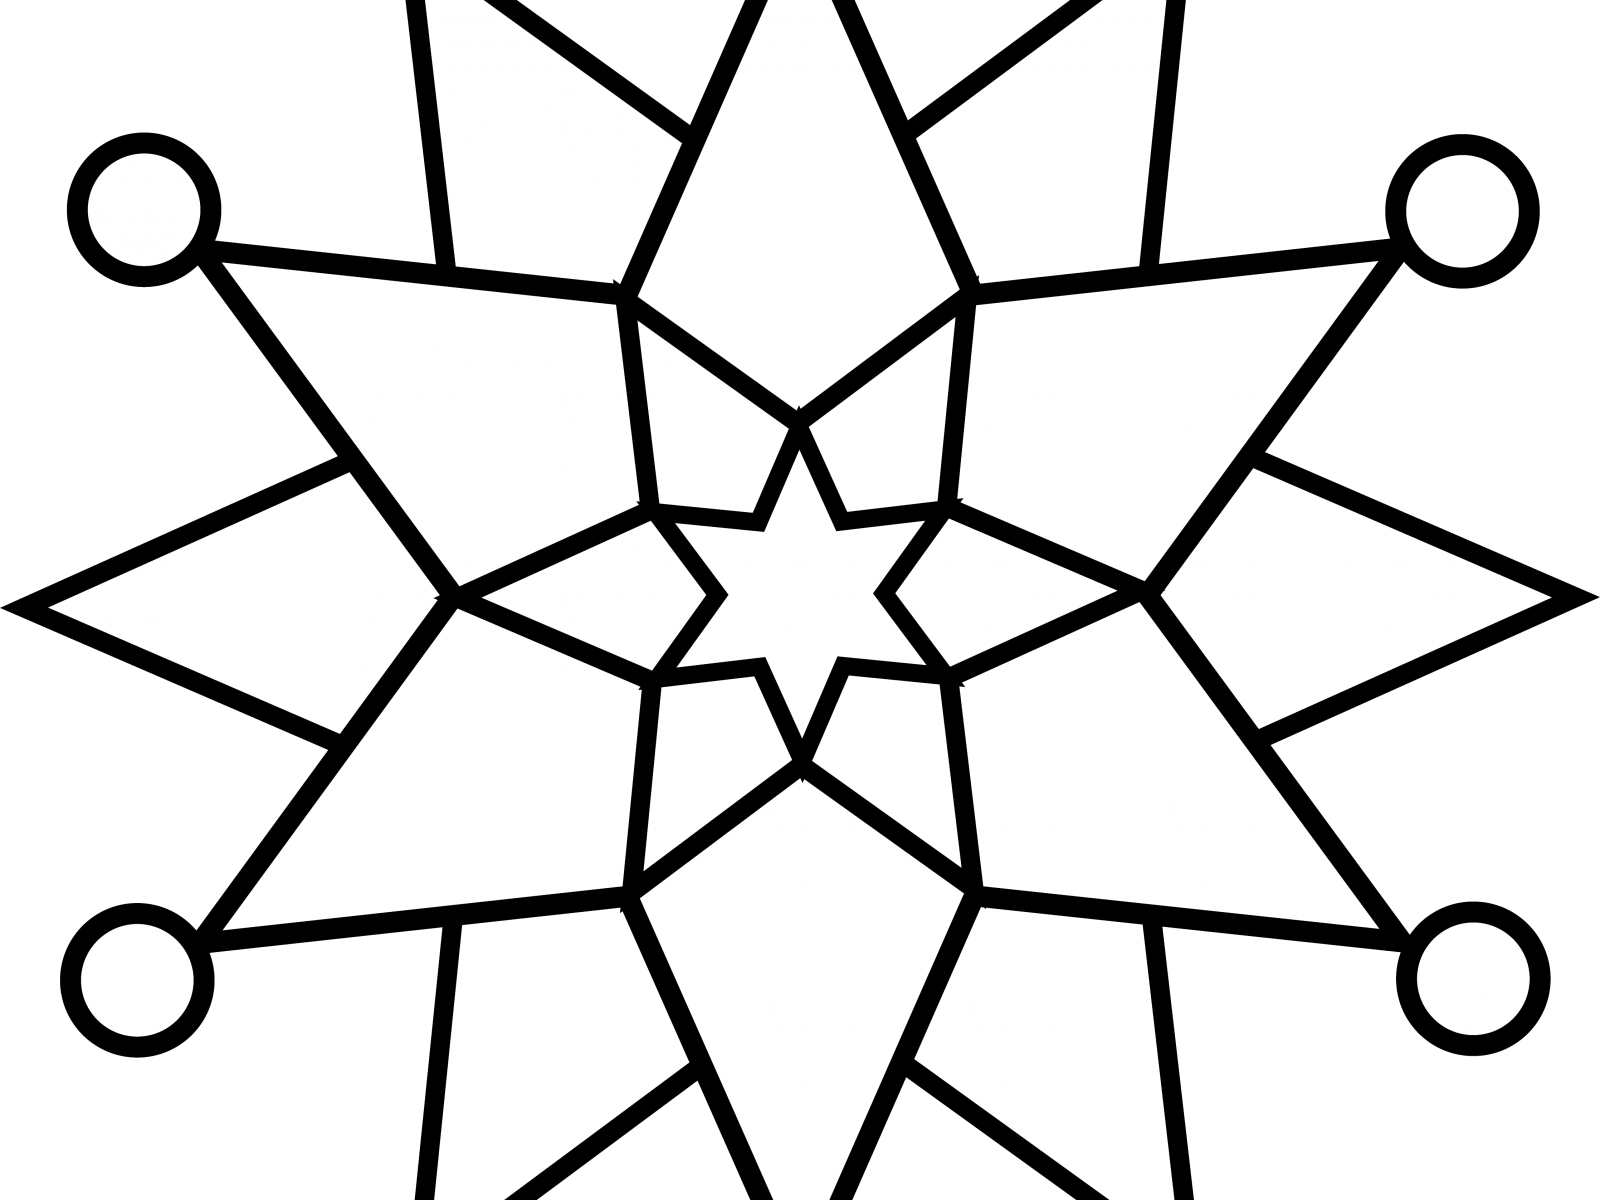 Simple Snowflake Pictures To Print Competitive Christmas - 1985 Southeast Asian Games (1600x1200)